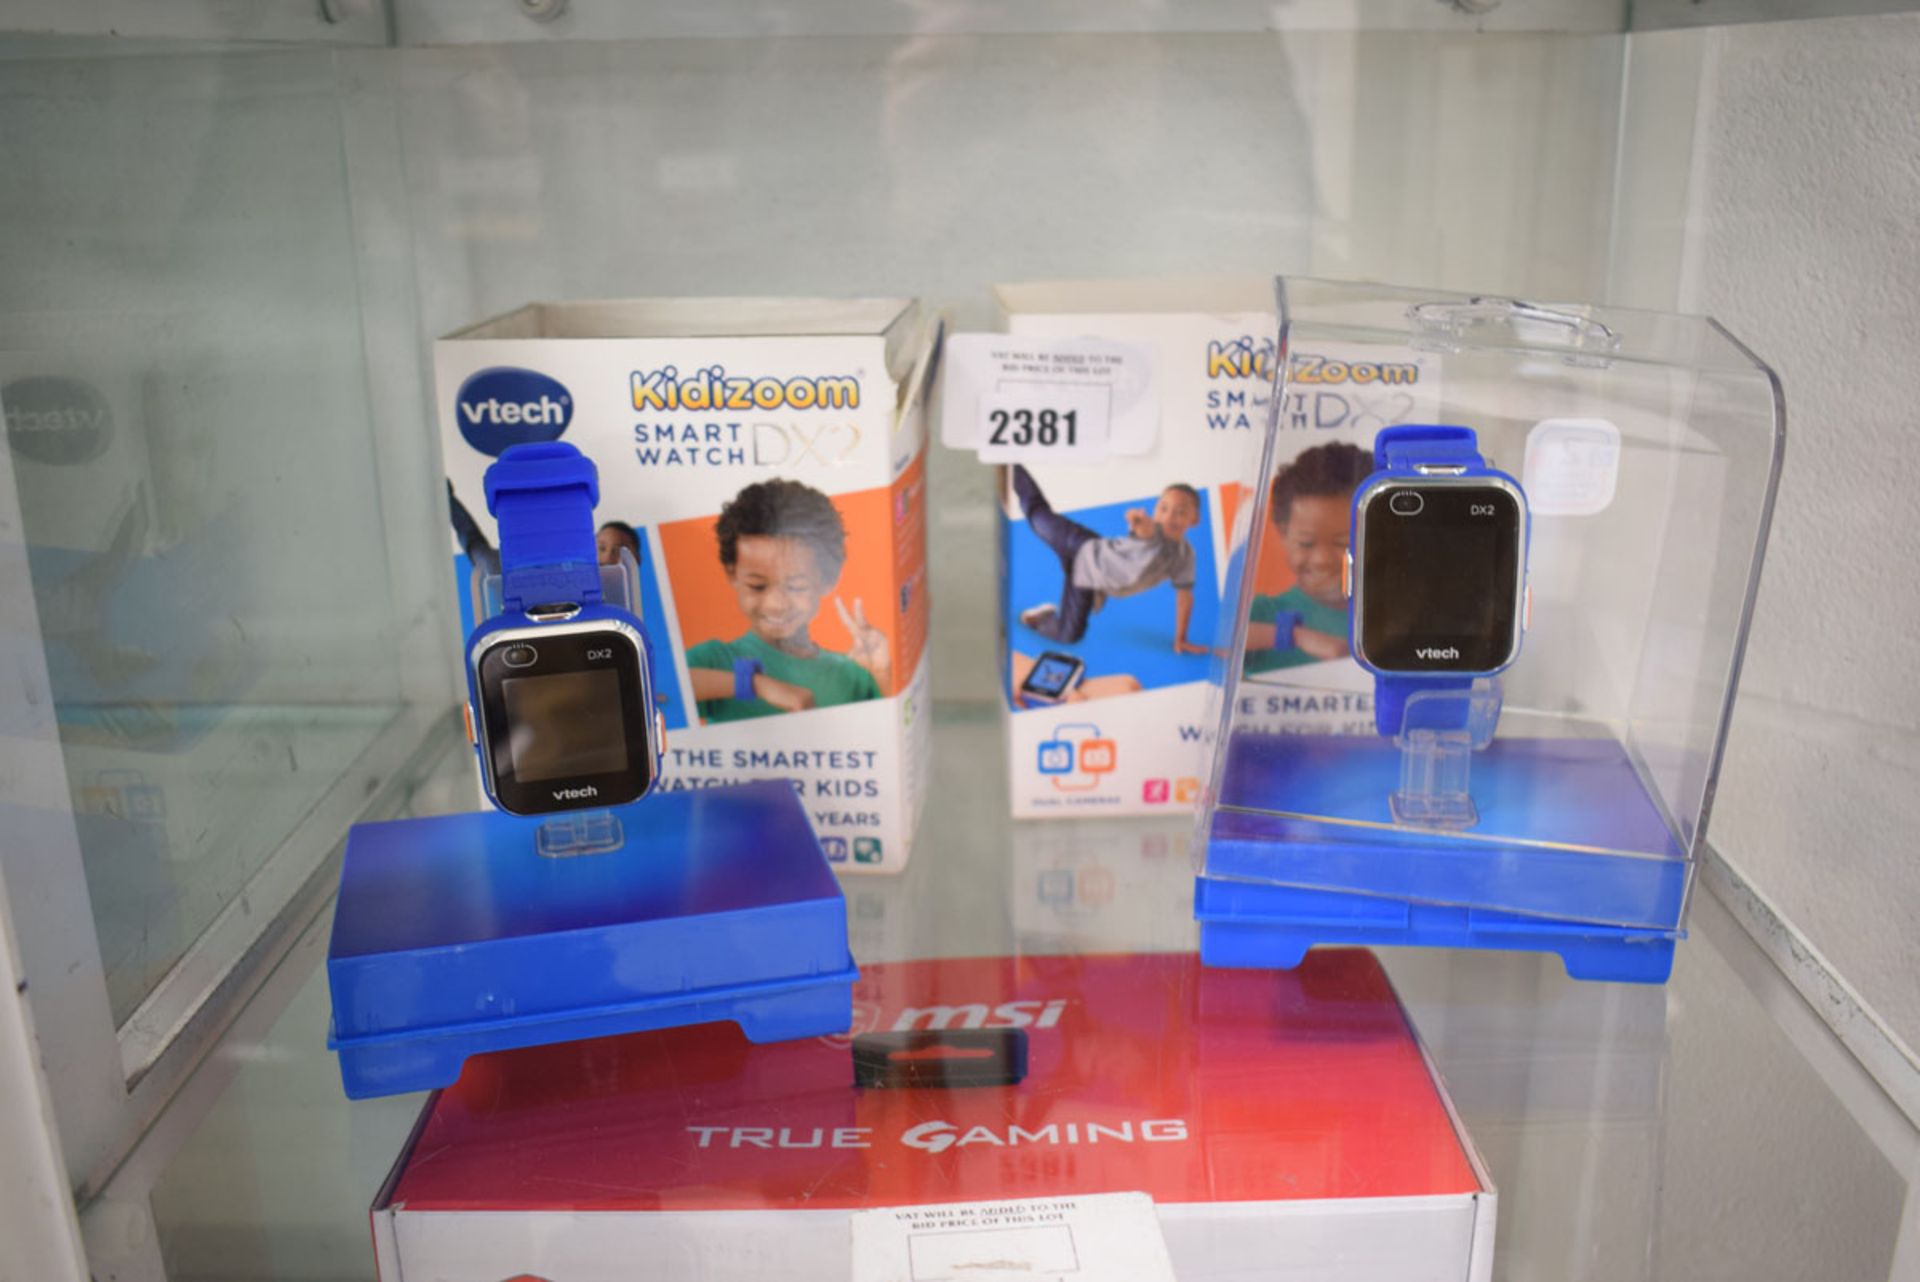 2 VTech Kidizoom DX2 smart watches with boxes